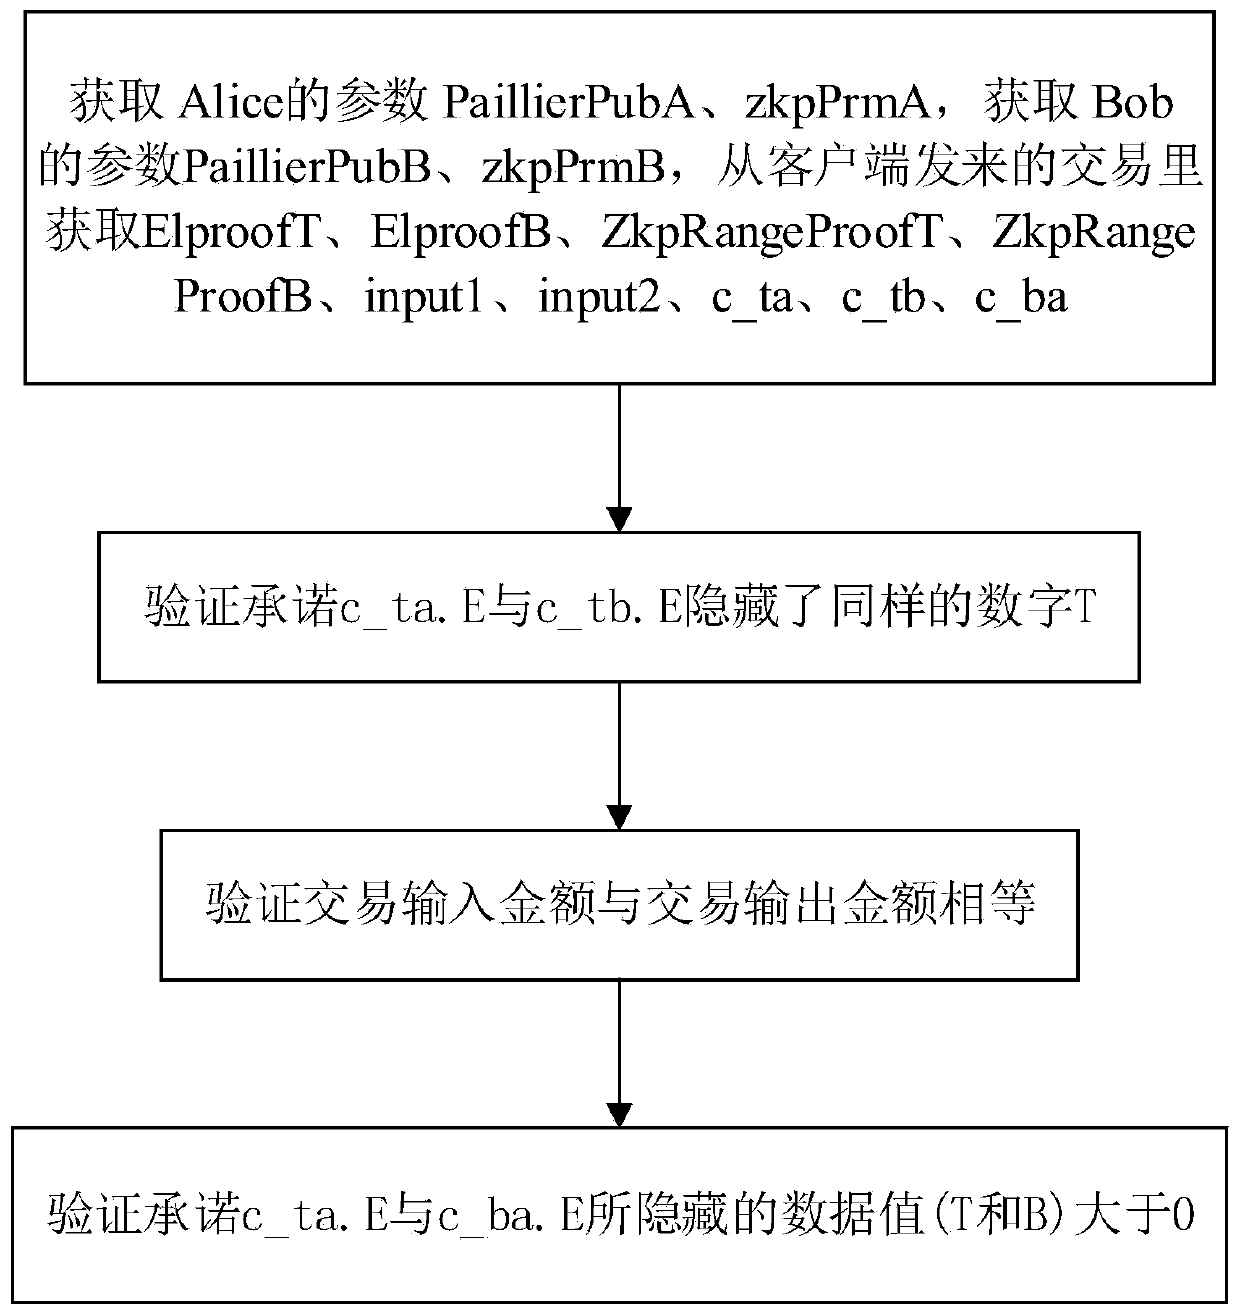 Homomorphic encryption method for encrypting transaction amount and supporting zero knowledge proof